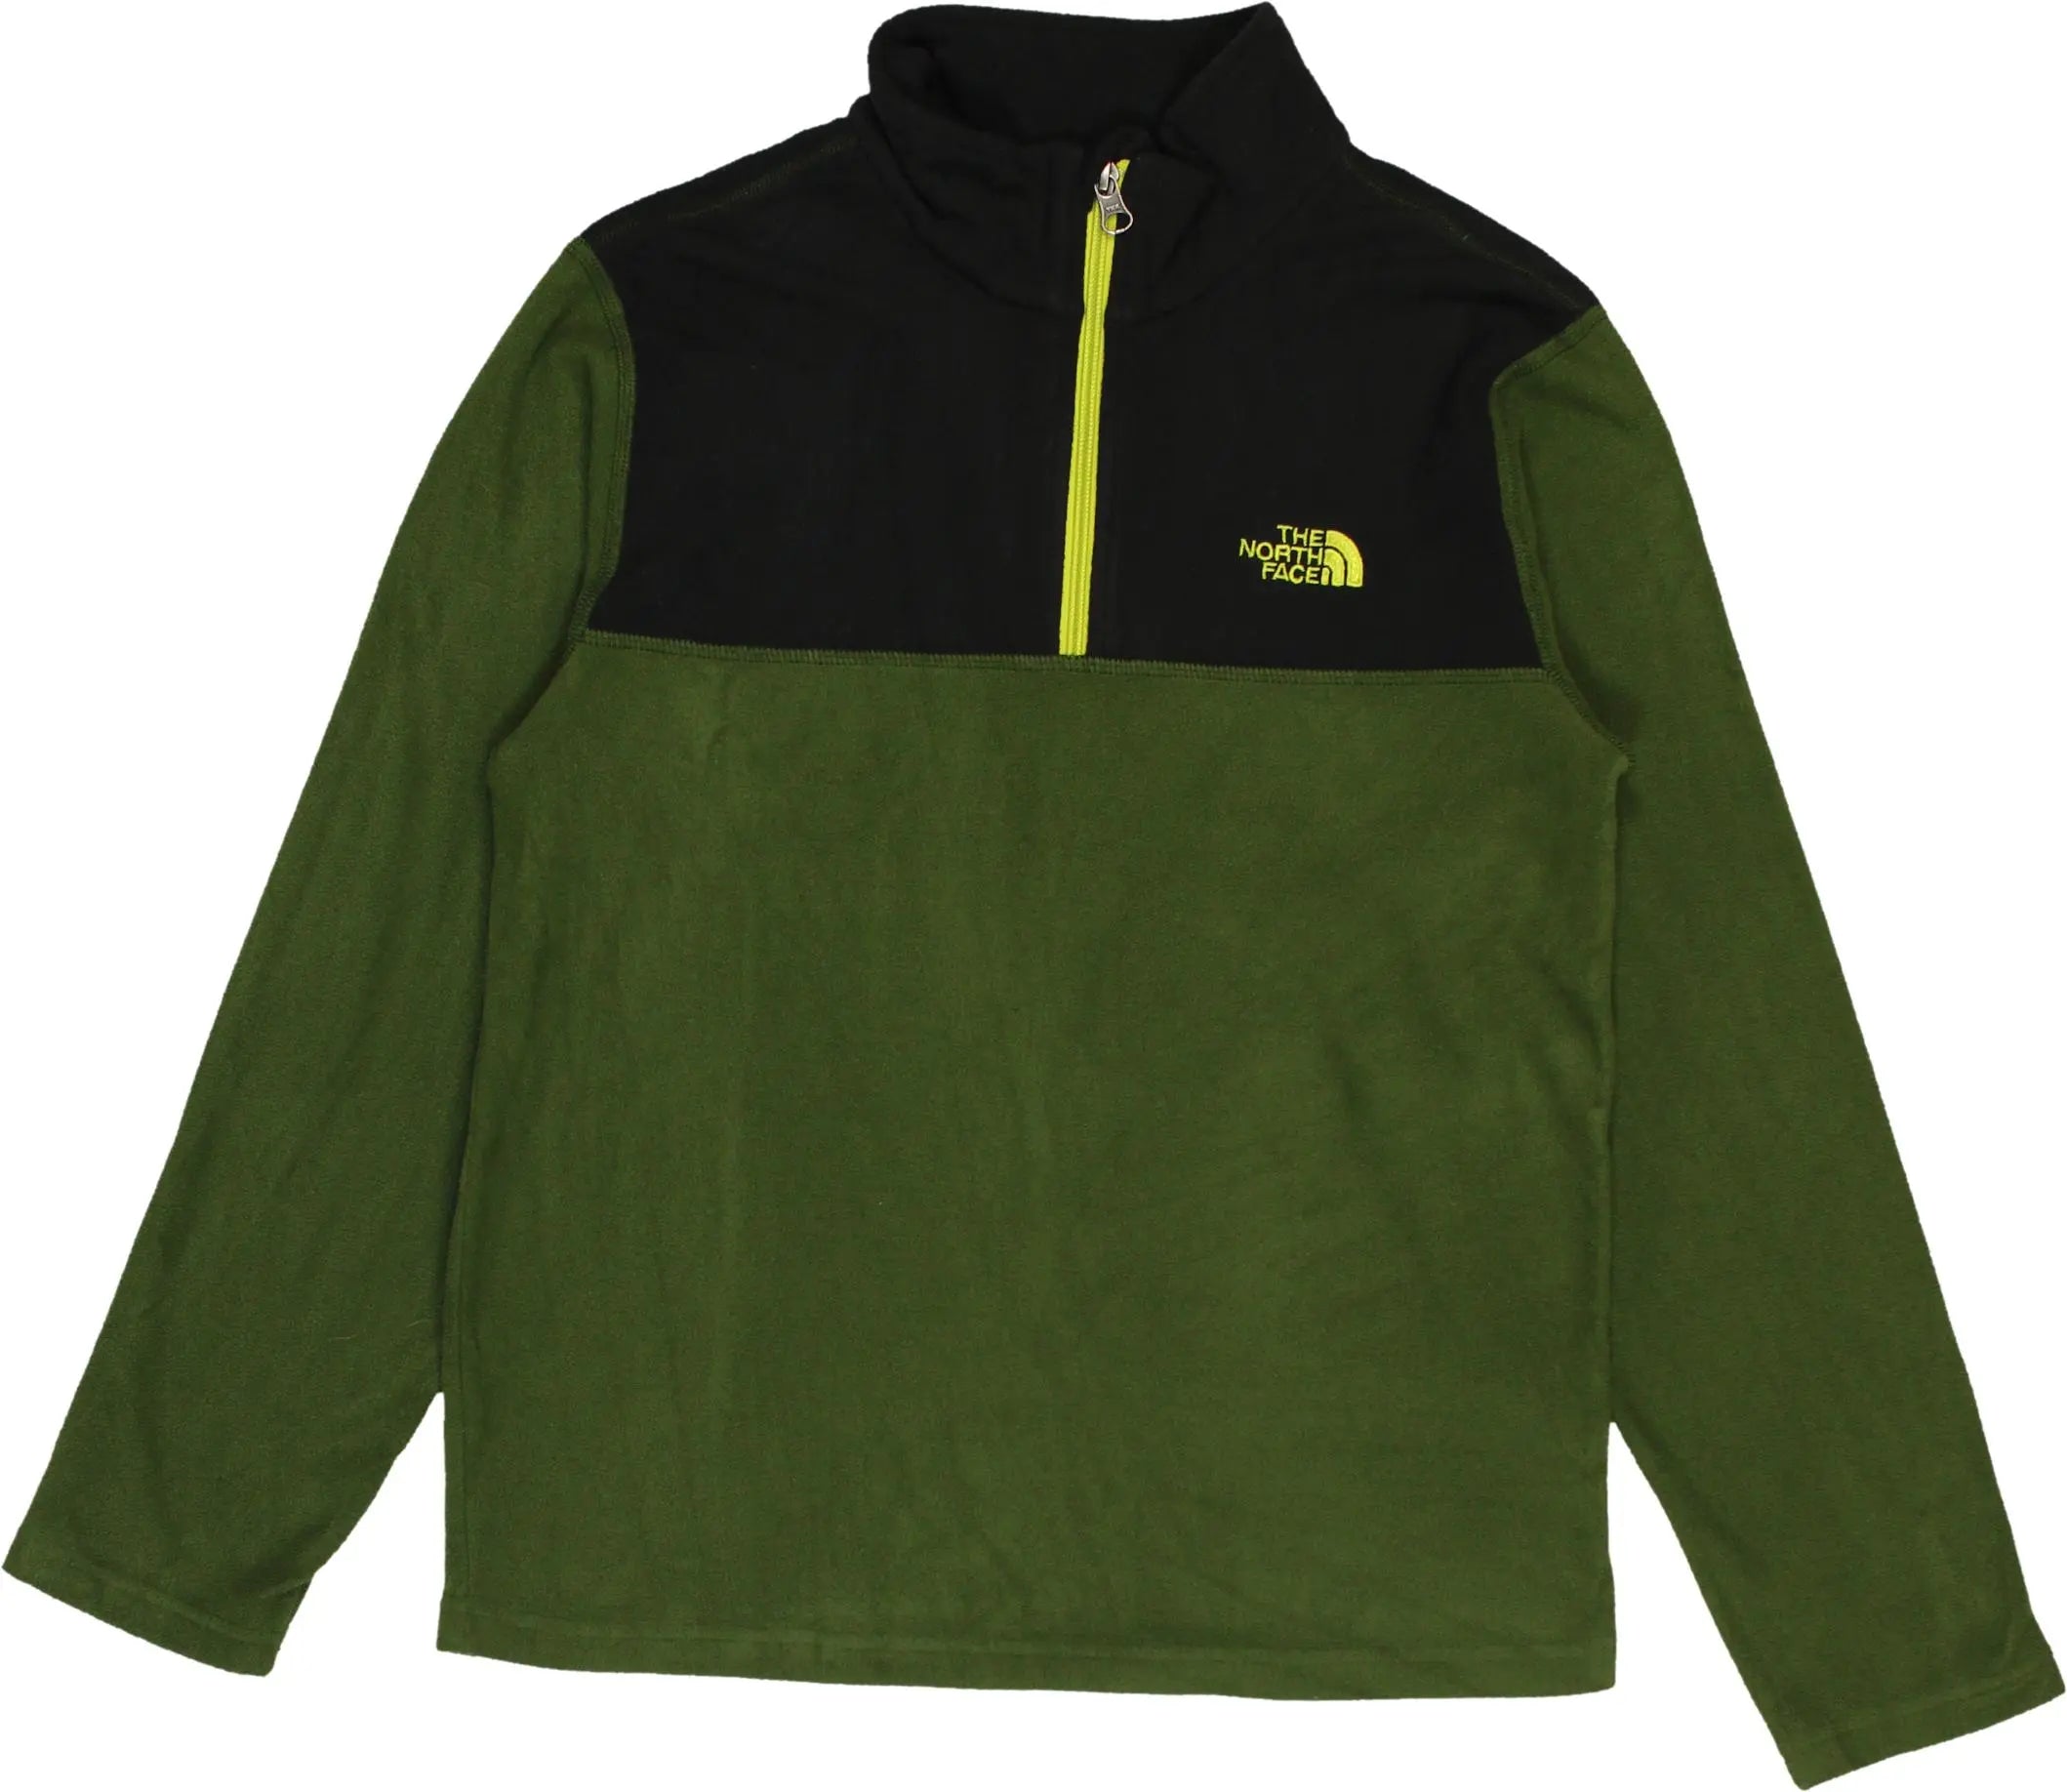 The North Face - Quarter Zip by The North Face- ThriftTale.com - Vintage and second handclothing